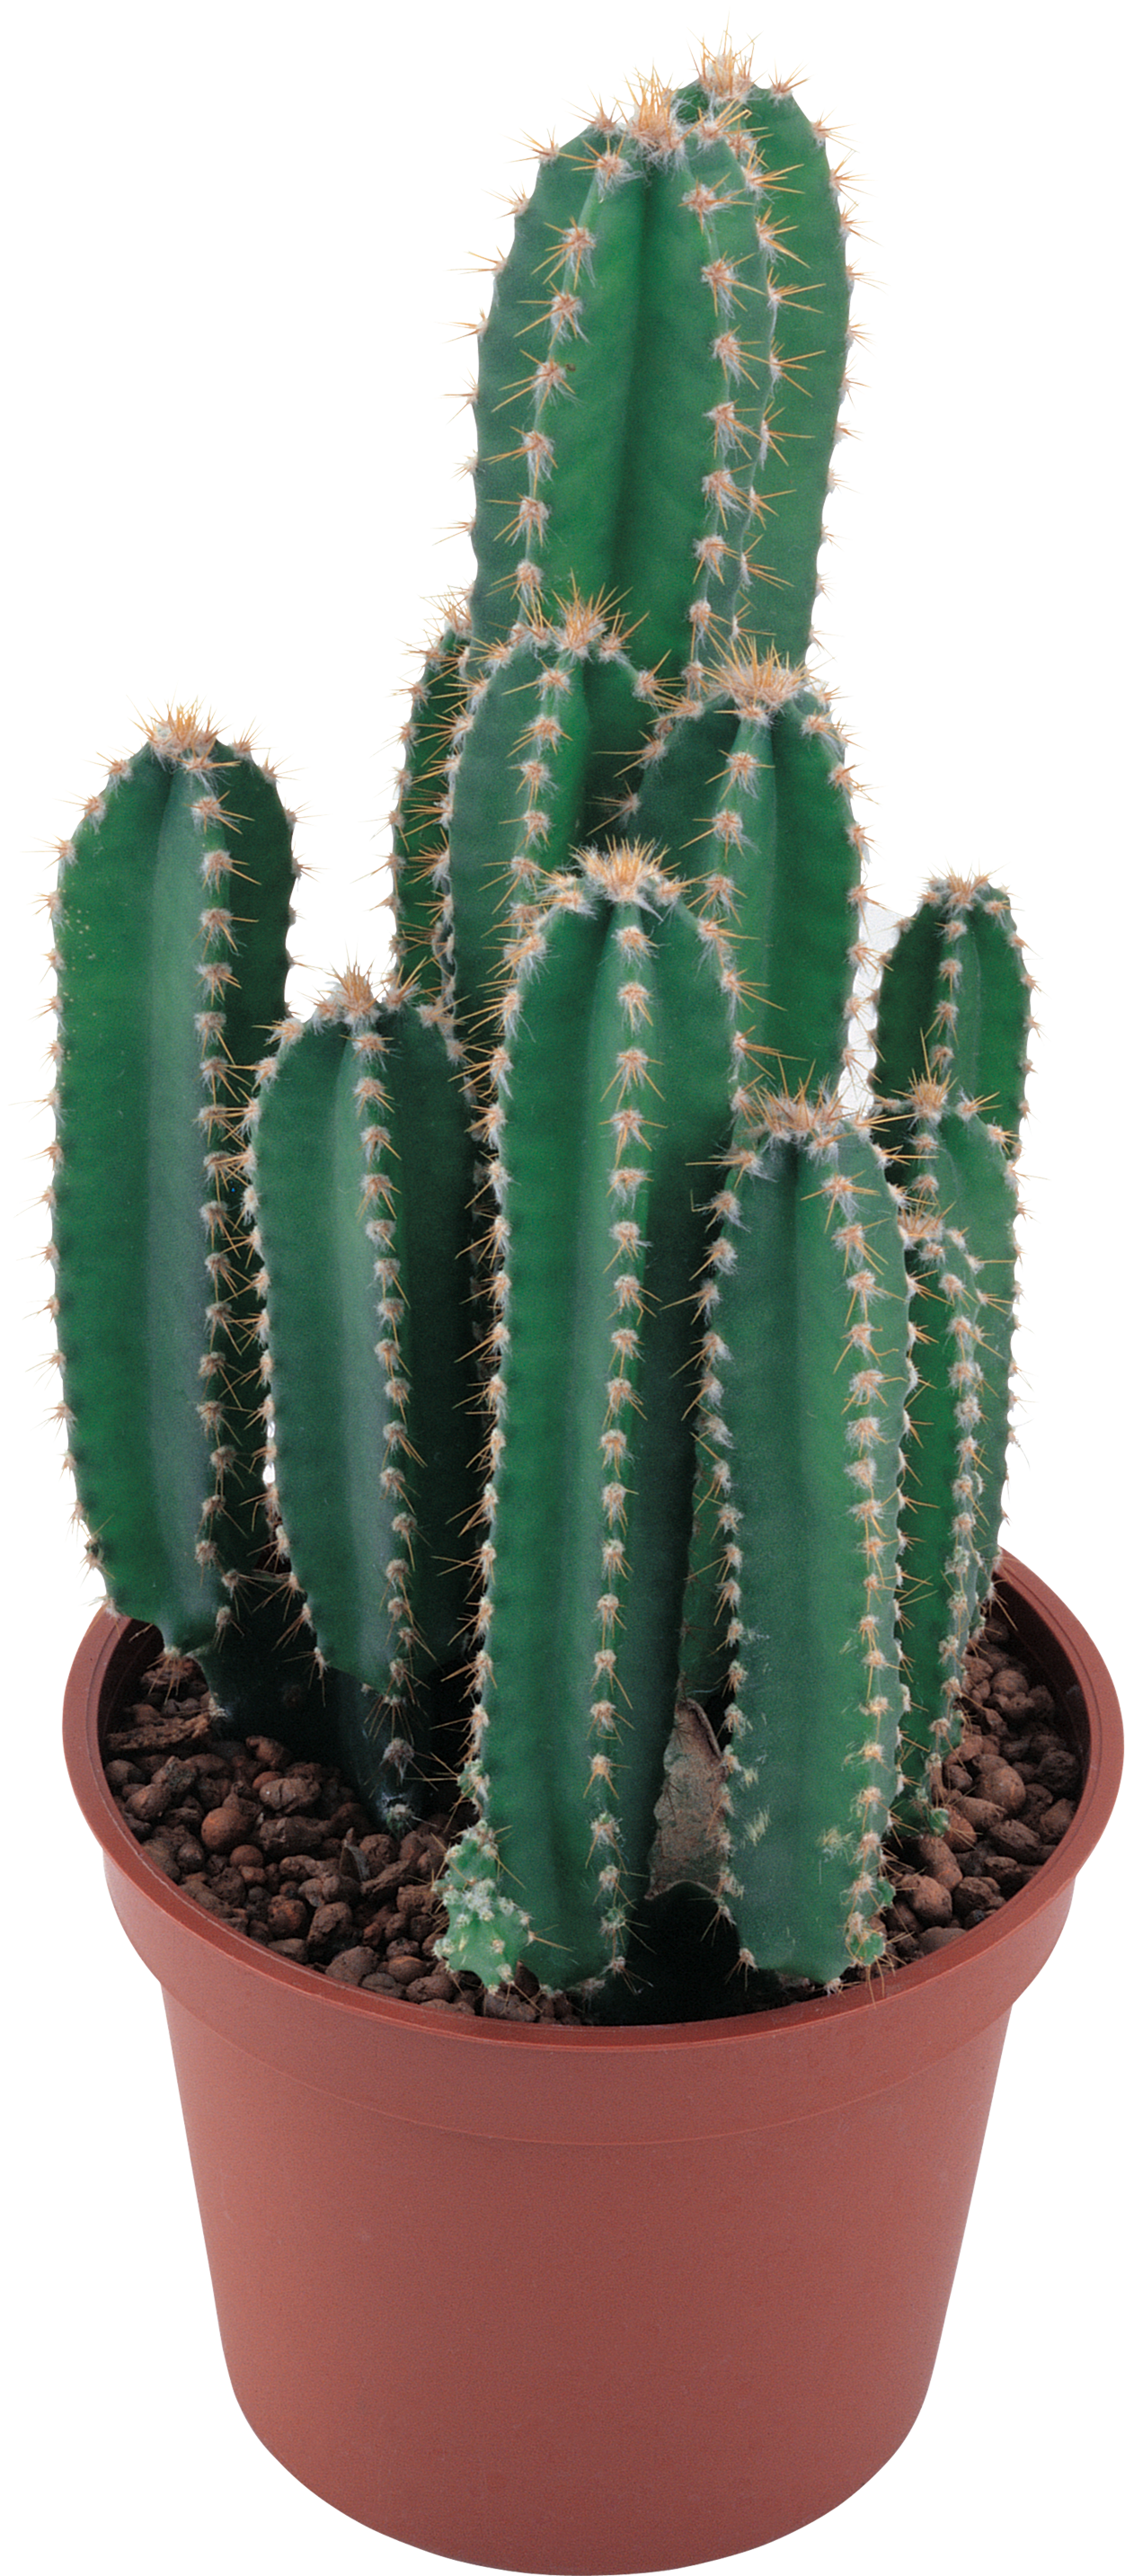 Png image free picture. Clipart tree cactus